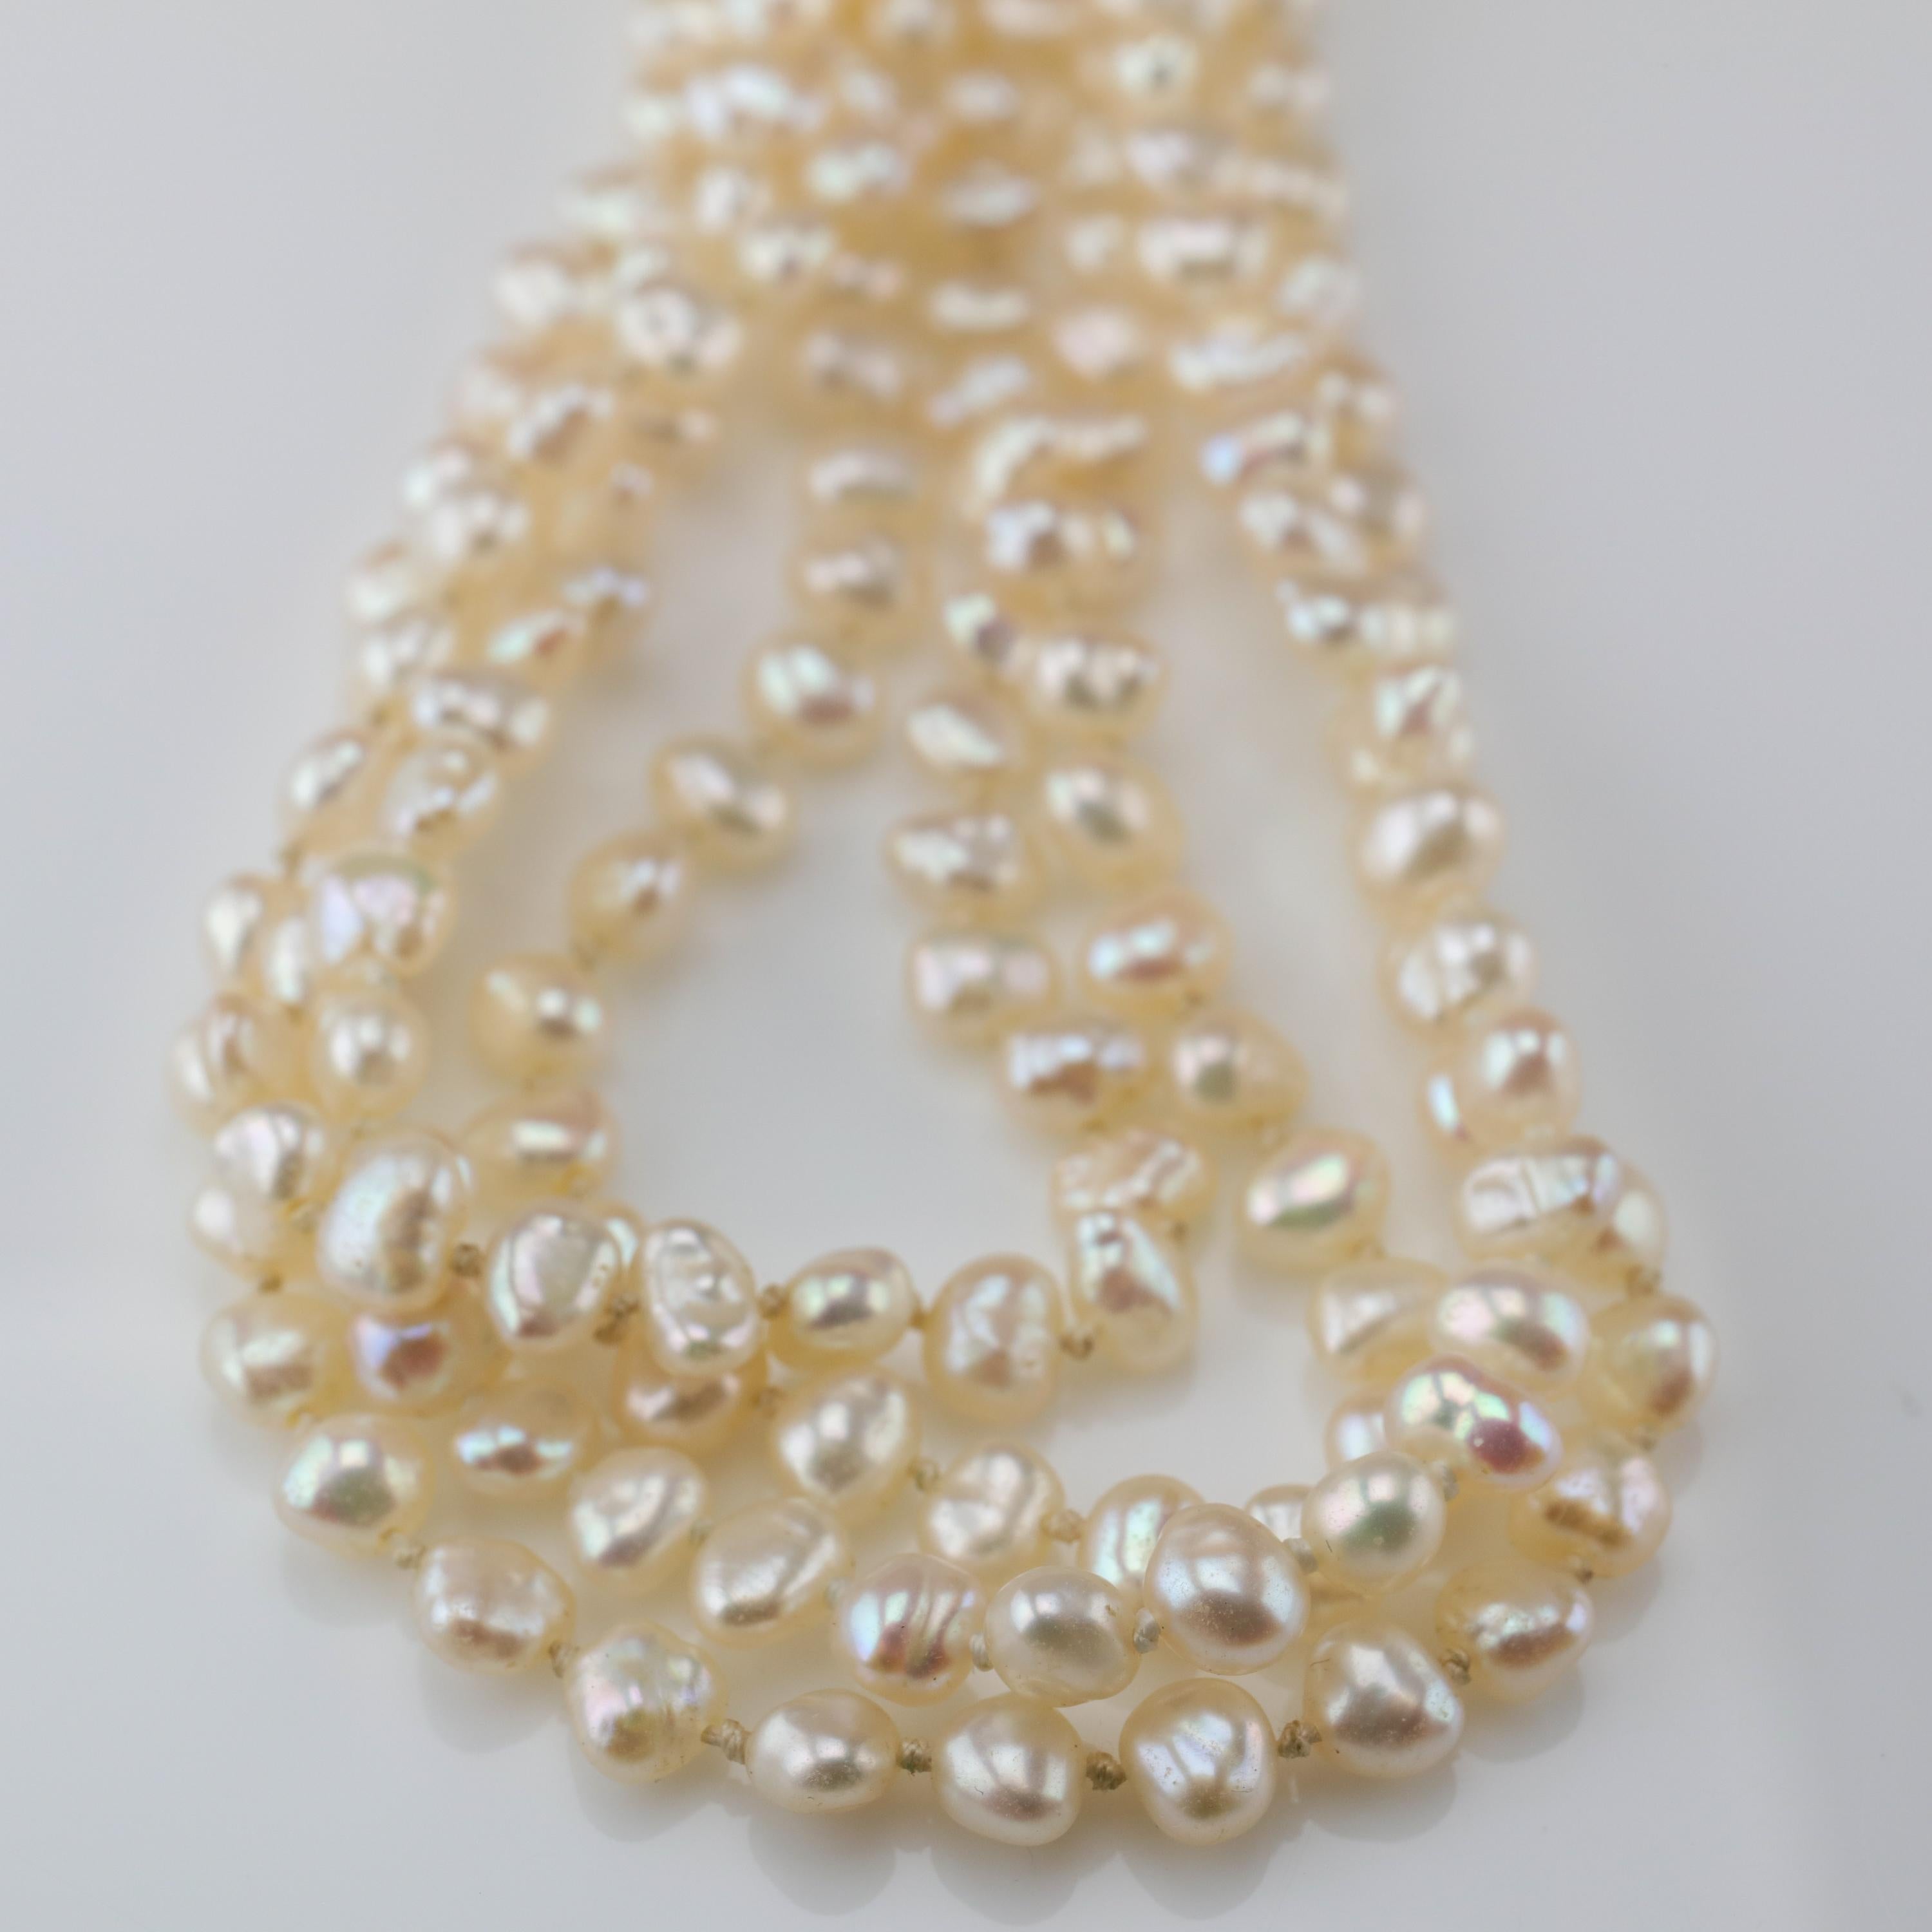 Women's Gump's Pearl and Opal Necklace Features Rare & Authentic Biwa Pearls